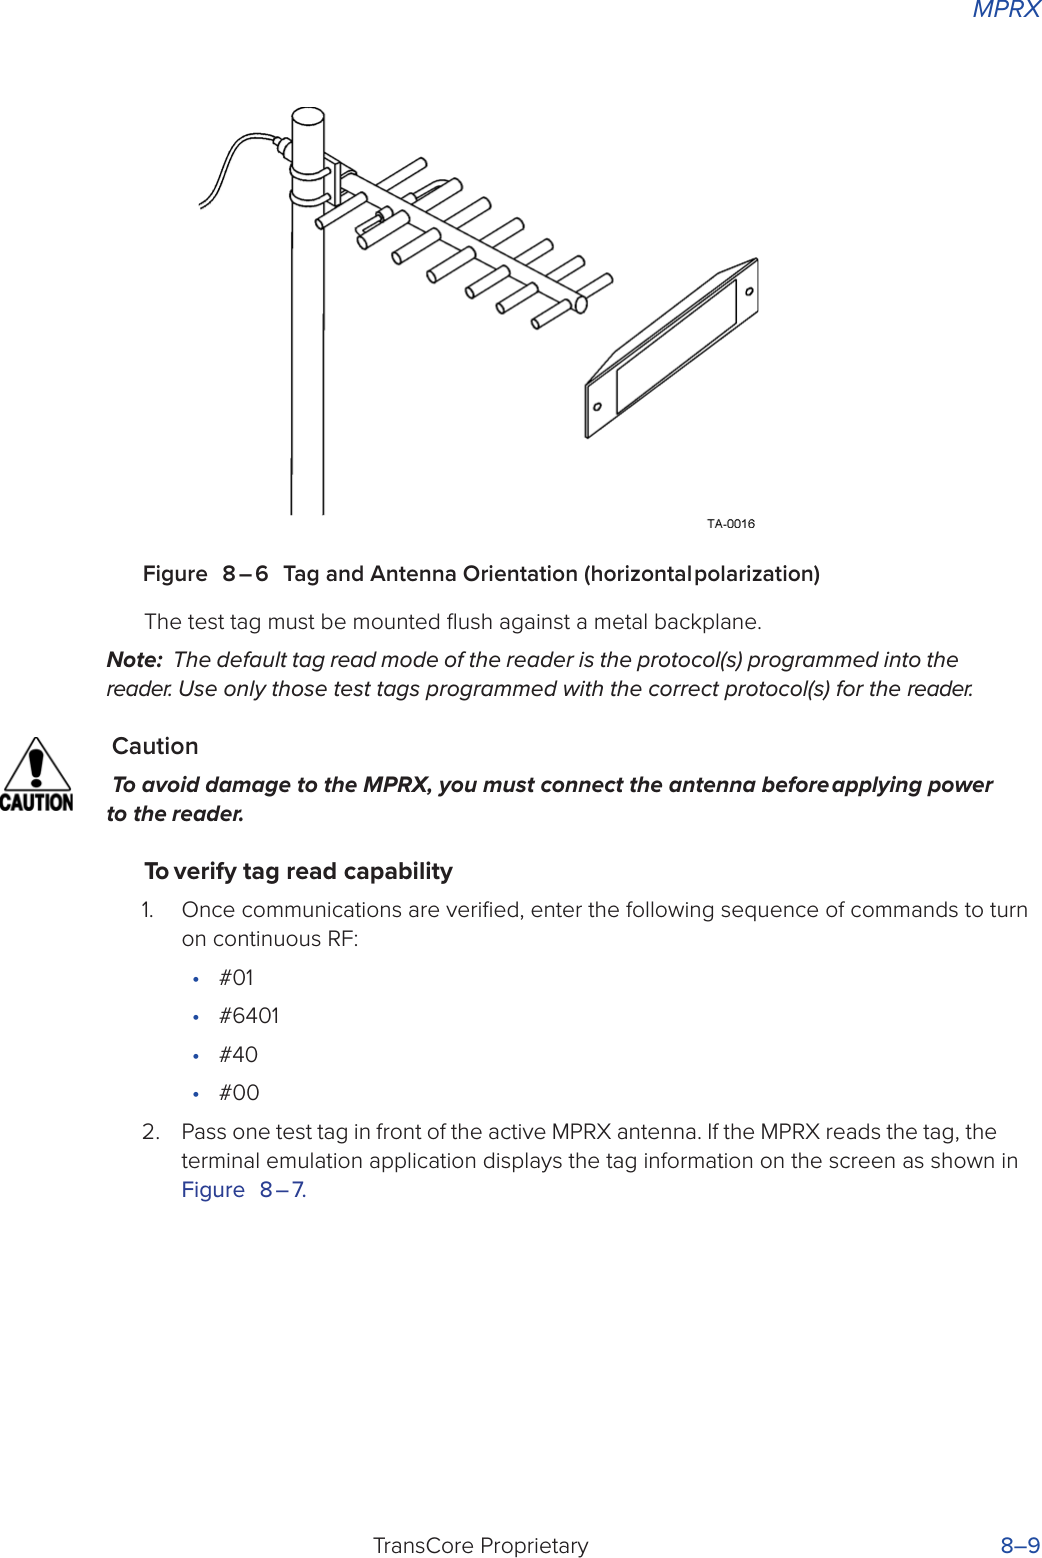 MPRXTransCore Proprietary 8–9Figure 8 – 6 Tag and Antenna Orientation (horizontal polarization)The test tag must be mounted ﬂush against a metal backplane.Note:  The default tag read mode of the reader is the protocol(s) programmed into the reader. Use only those test tags programmed with the correct protocol(s) for the reader.CautionTo avoid damage to the MPRX, you must connect the antenna before applying power to the reader.To verify tag read capability1.  Once communications are veriﬁed, enter the following sequence of commands to turn on continuous RF:•  #01•  #6401•  #40•  #002.  Pass one test tag in front of the active MPRX antenna. If the MPRX reads the tag, the terminal emulation application displays the tag information on the screen as shown in Figure 8 – 7.